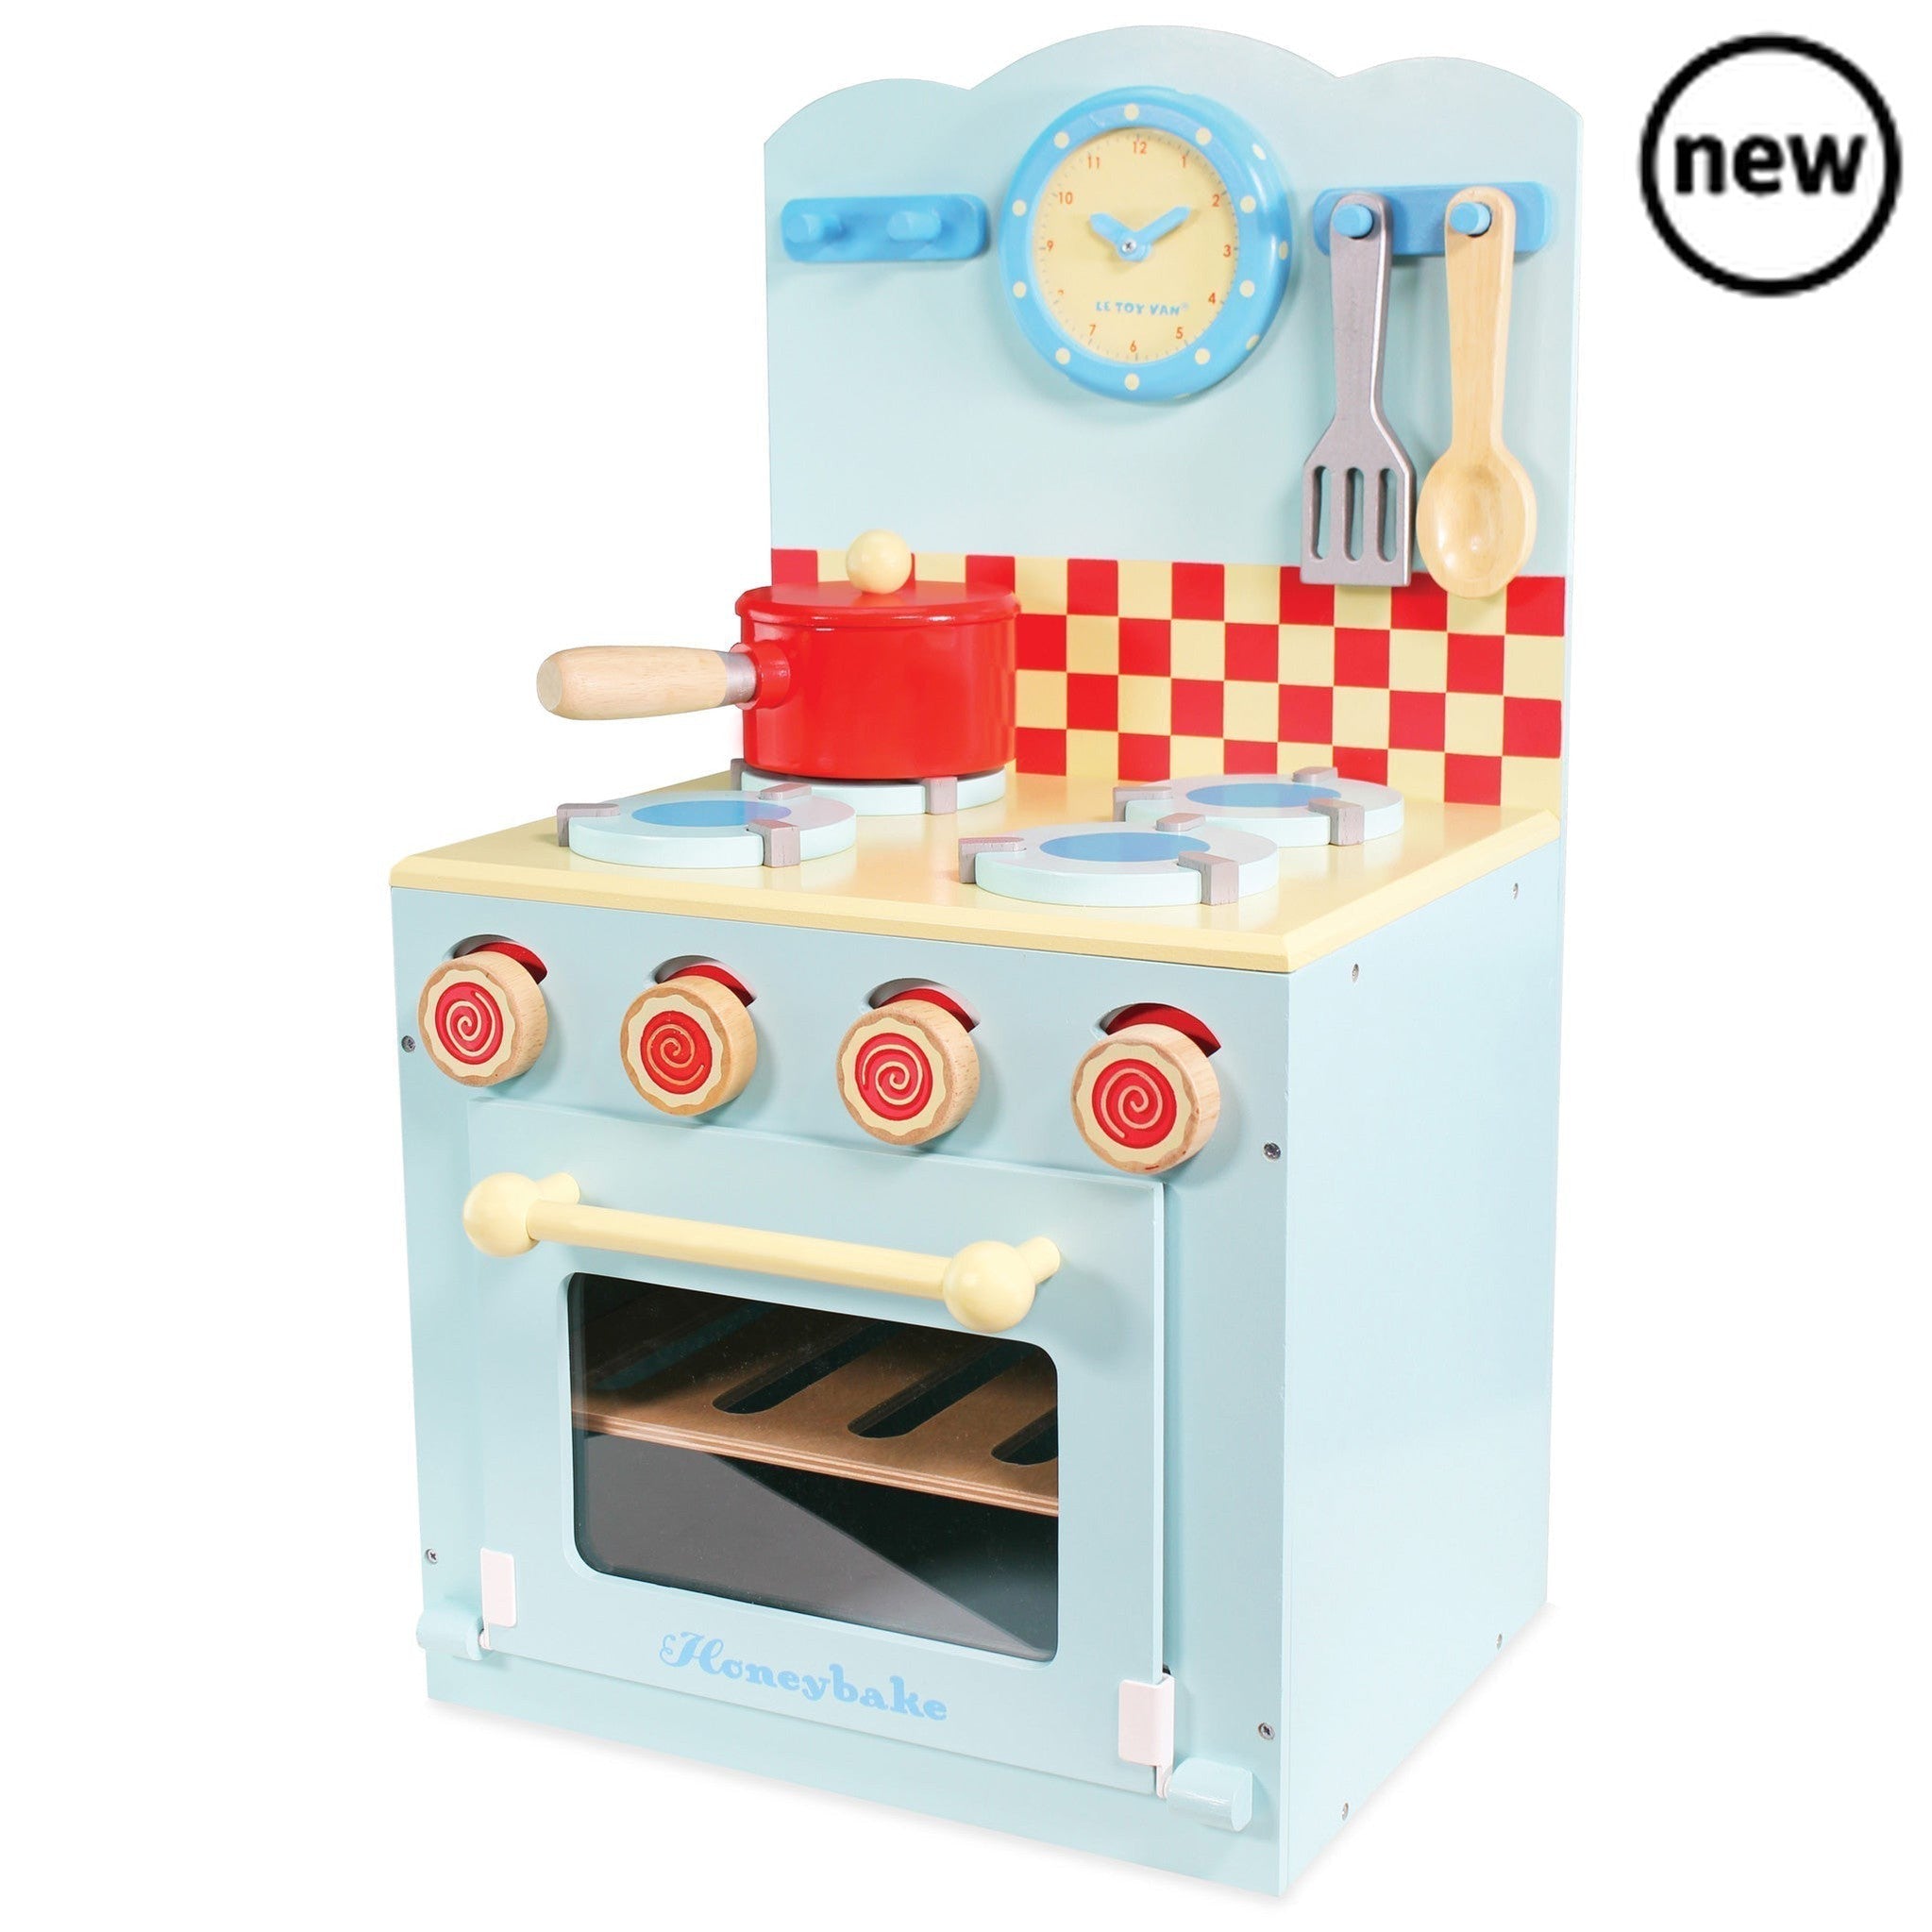 Oven & Hob Blue, Description Our Oven and Hob set is the perfect toy for budding cooks and mini bakers. This delightful play oven is full of fun, with a variety of bright play accessories and inspiring details to encourage imaginative, role play and learning development. Designed in a traditional style, this nostalgic toy is built to last, made from durable and sustainable wood and features rustic movable dials, an opening oven door, a clock with moving hands to set the cooking time, plus a cooking pot, spo